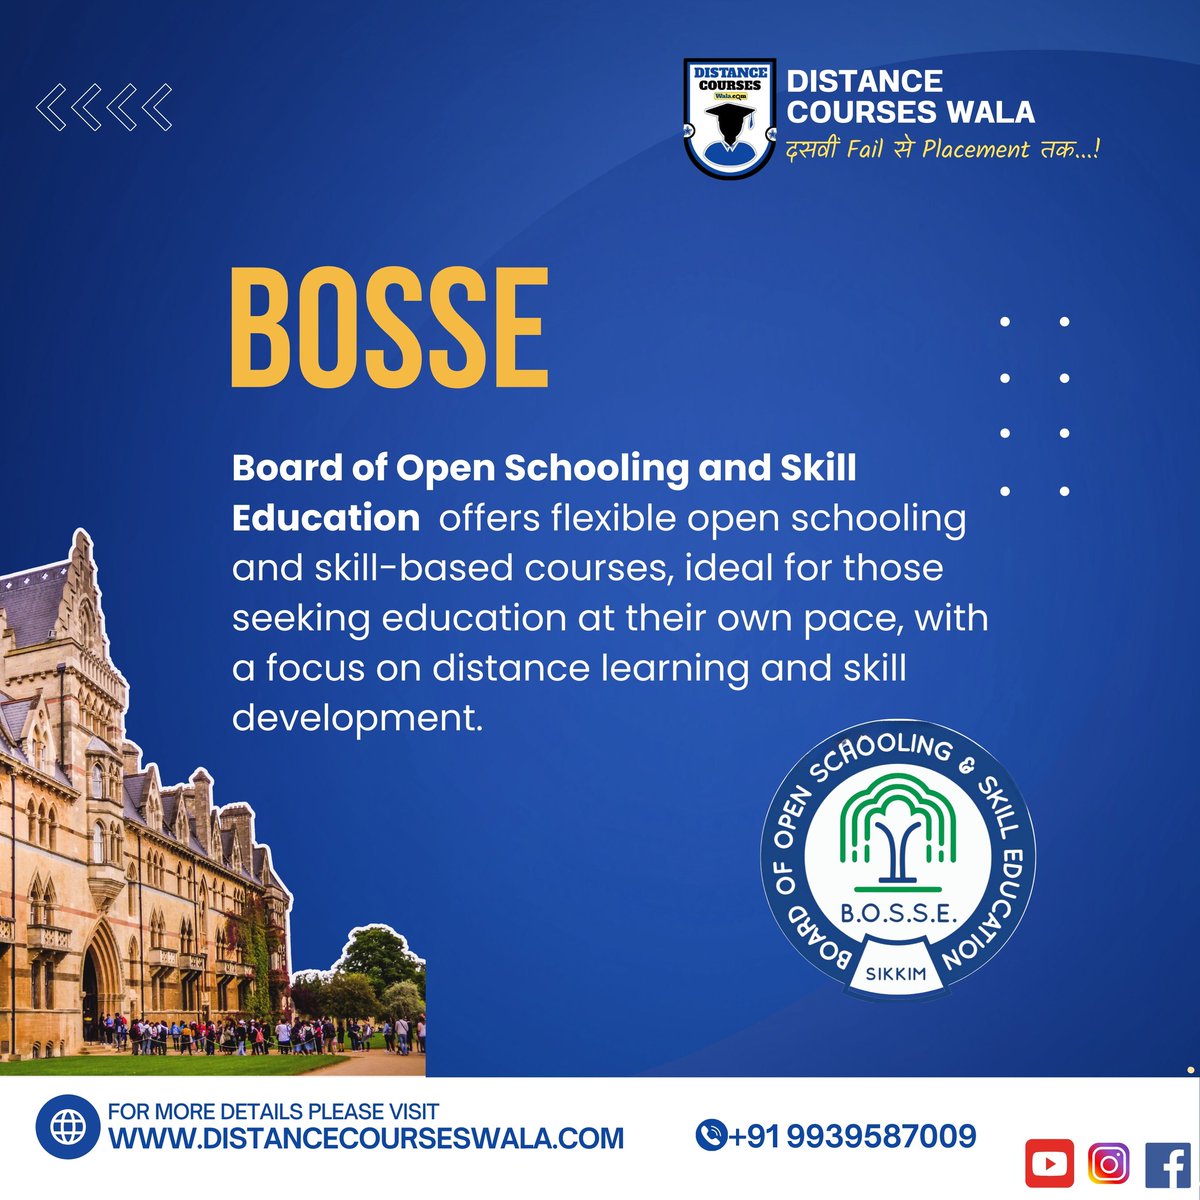 'Your future starts here! 📷 Join Distance Courses Wala, distance learning institute. Unlock flexible education with BOSSE Board courses. Contact us today and take the first step towards your dreams! 📷 #DistanceLearning #BOSSE #EducationForAll#distancecourseswala'